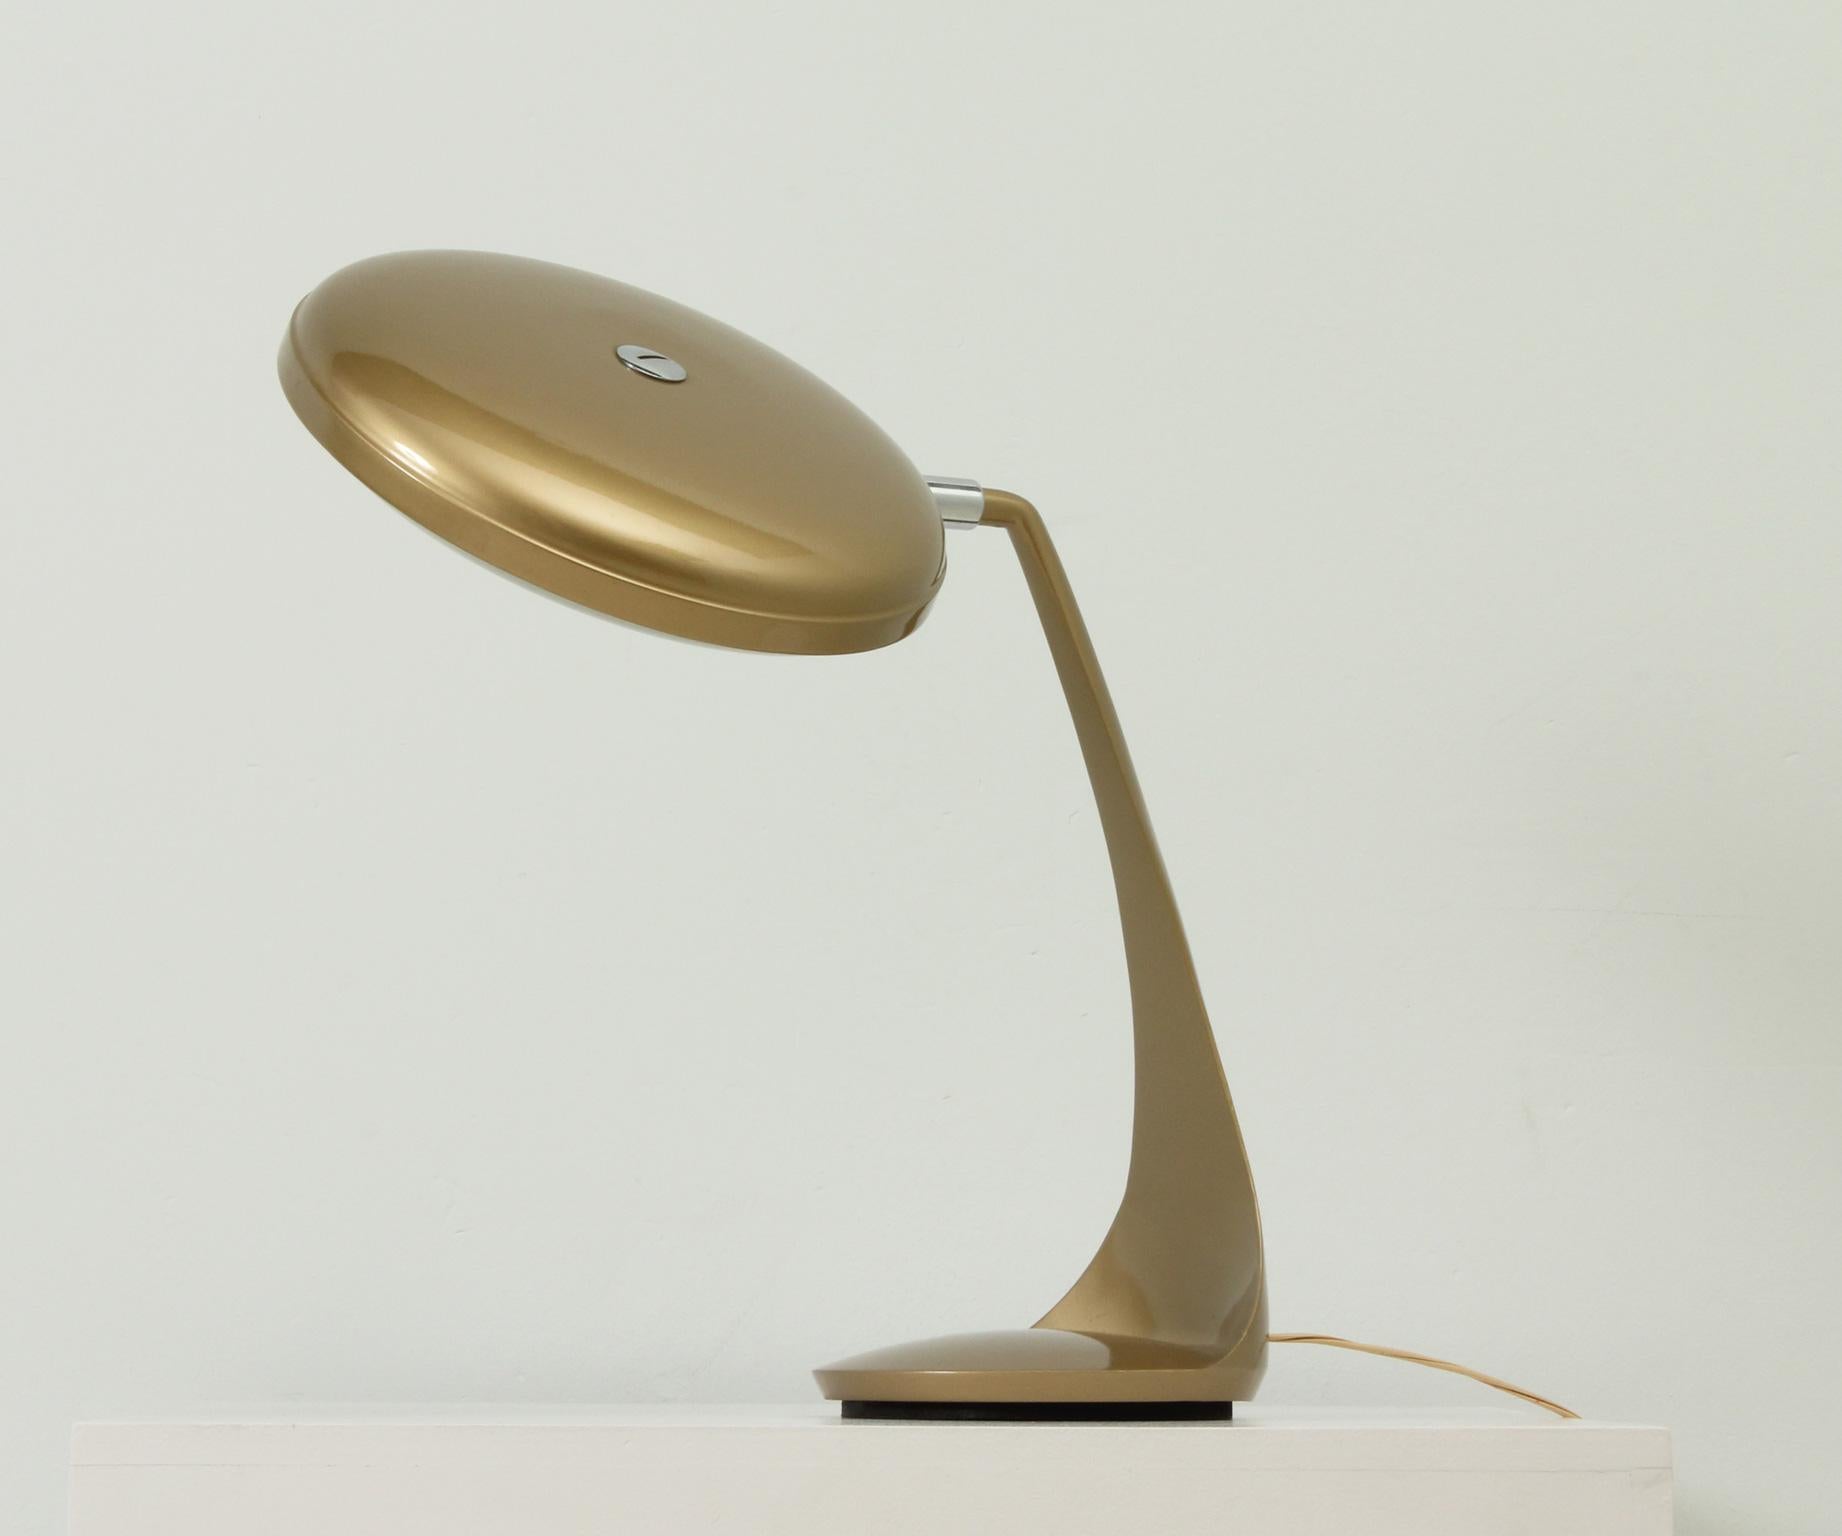 Desk lamp model Reina edited by Lupela, Spain, 1960's. Base and rotary shade enamelled in metallic gold paint with glass reflector underneath shade.